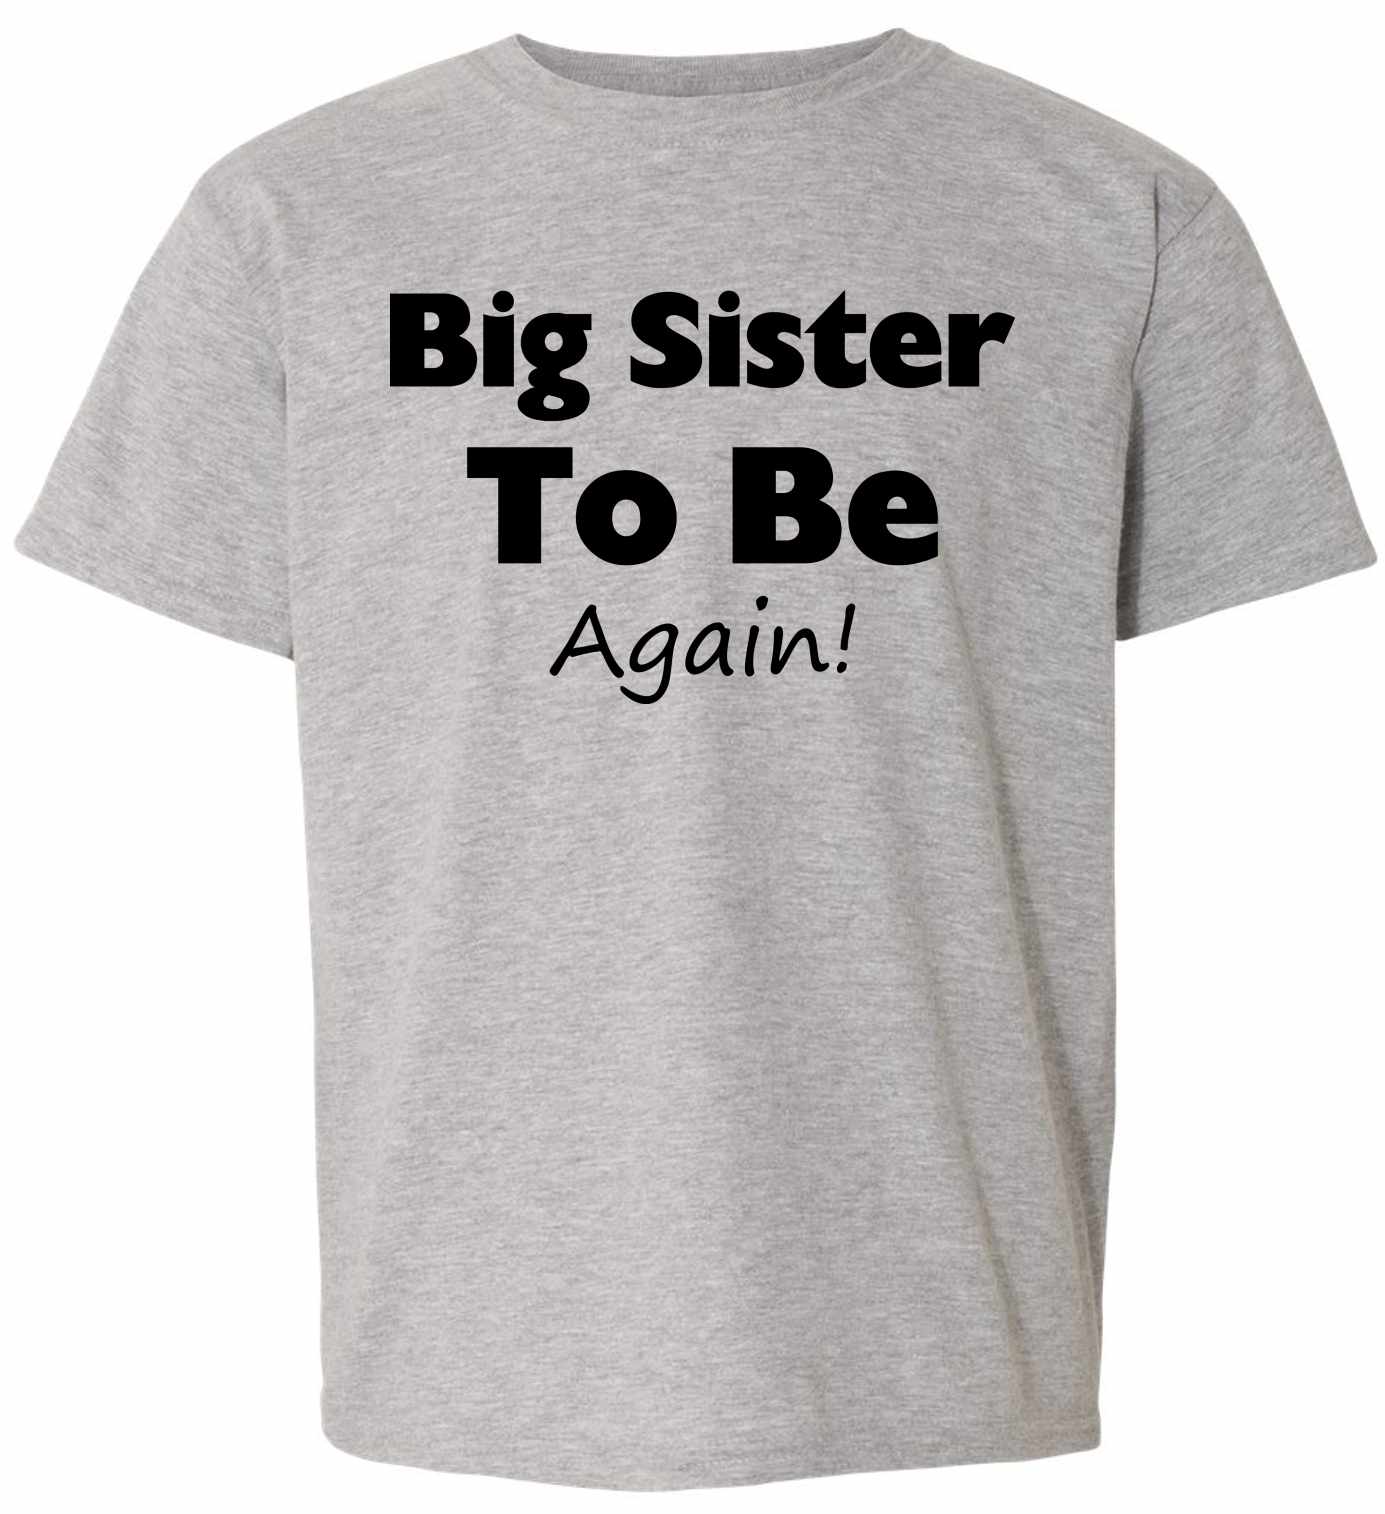 Big Sister To Be Again on Kids T-Shirt (#877-201)